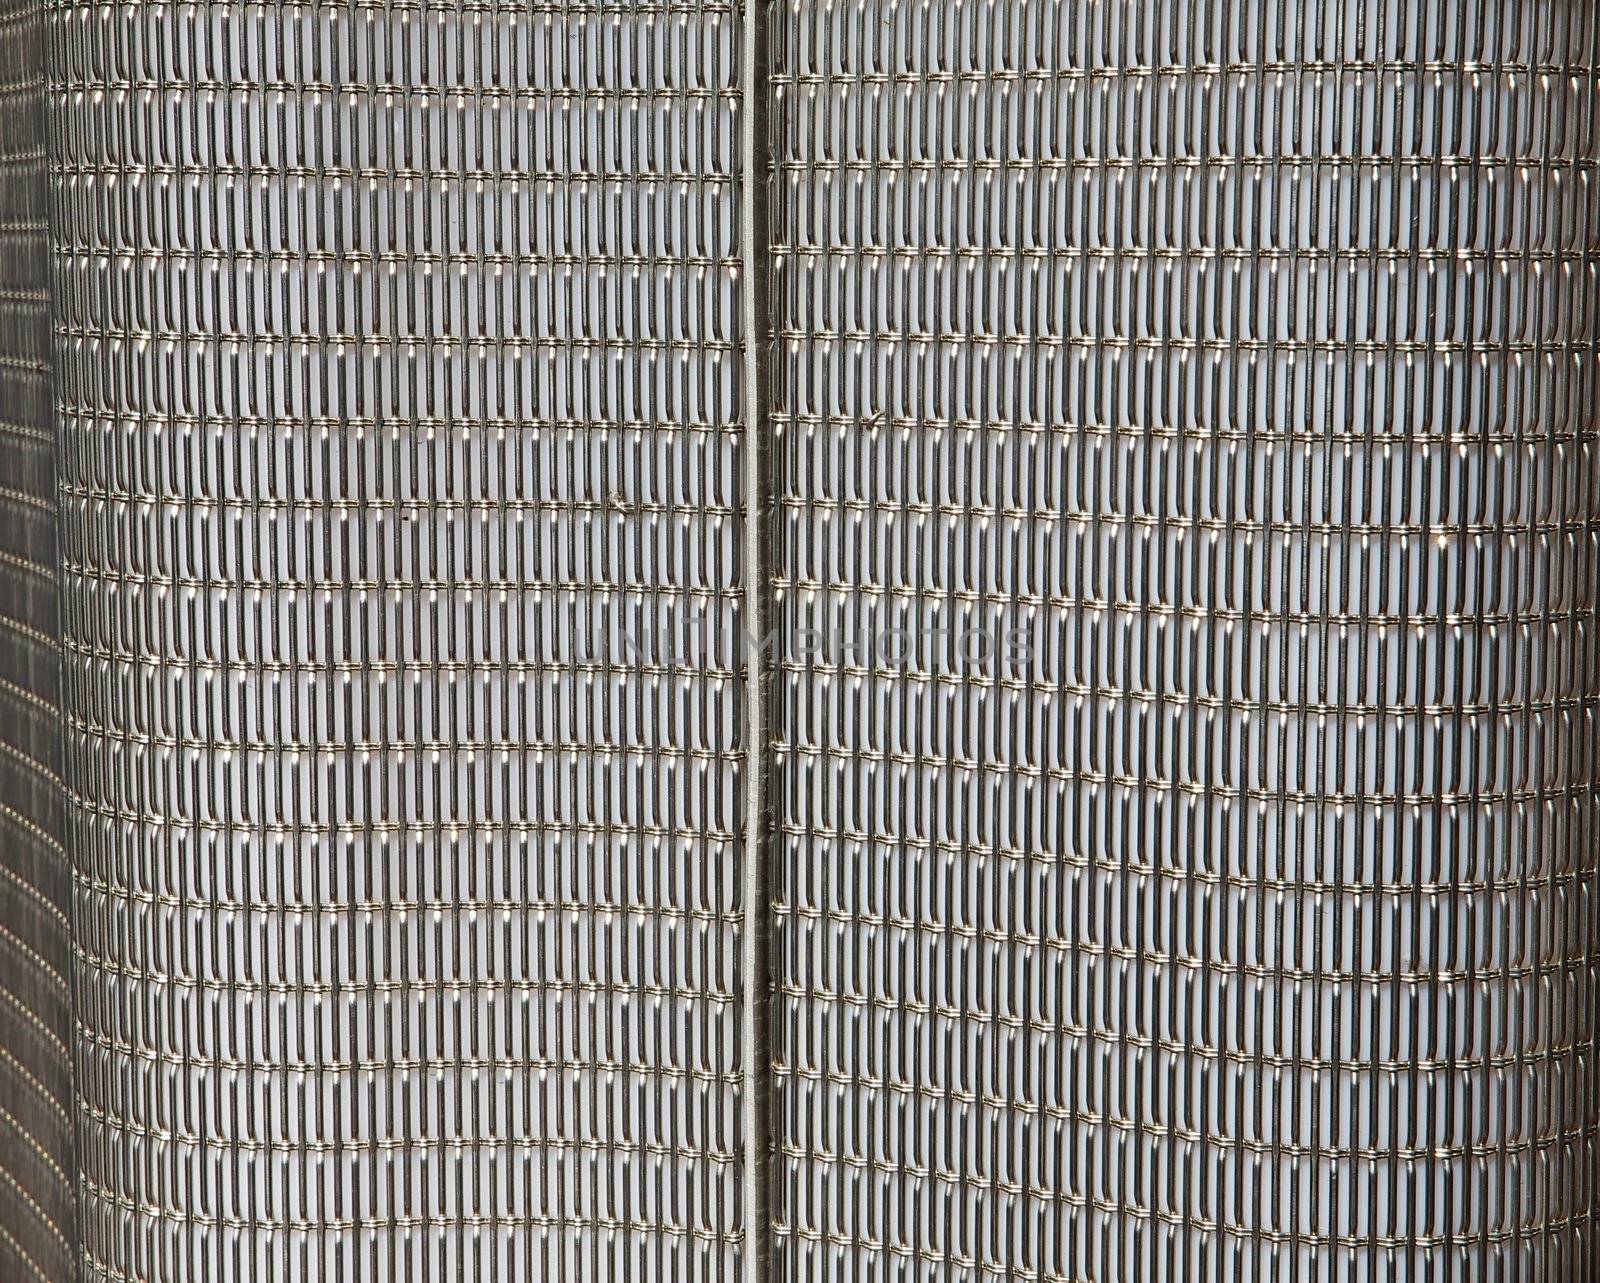 Abstract metal grid wall that is part of a city light rail stop